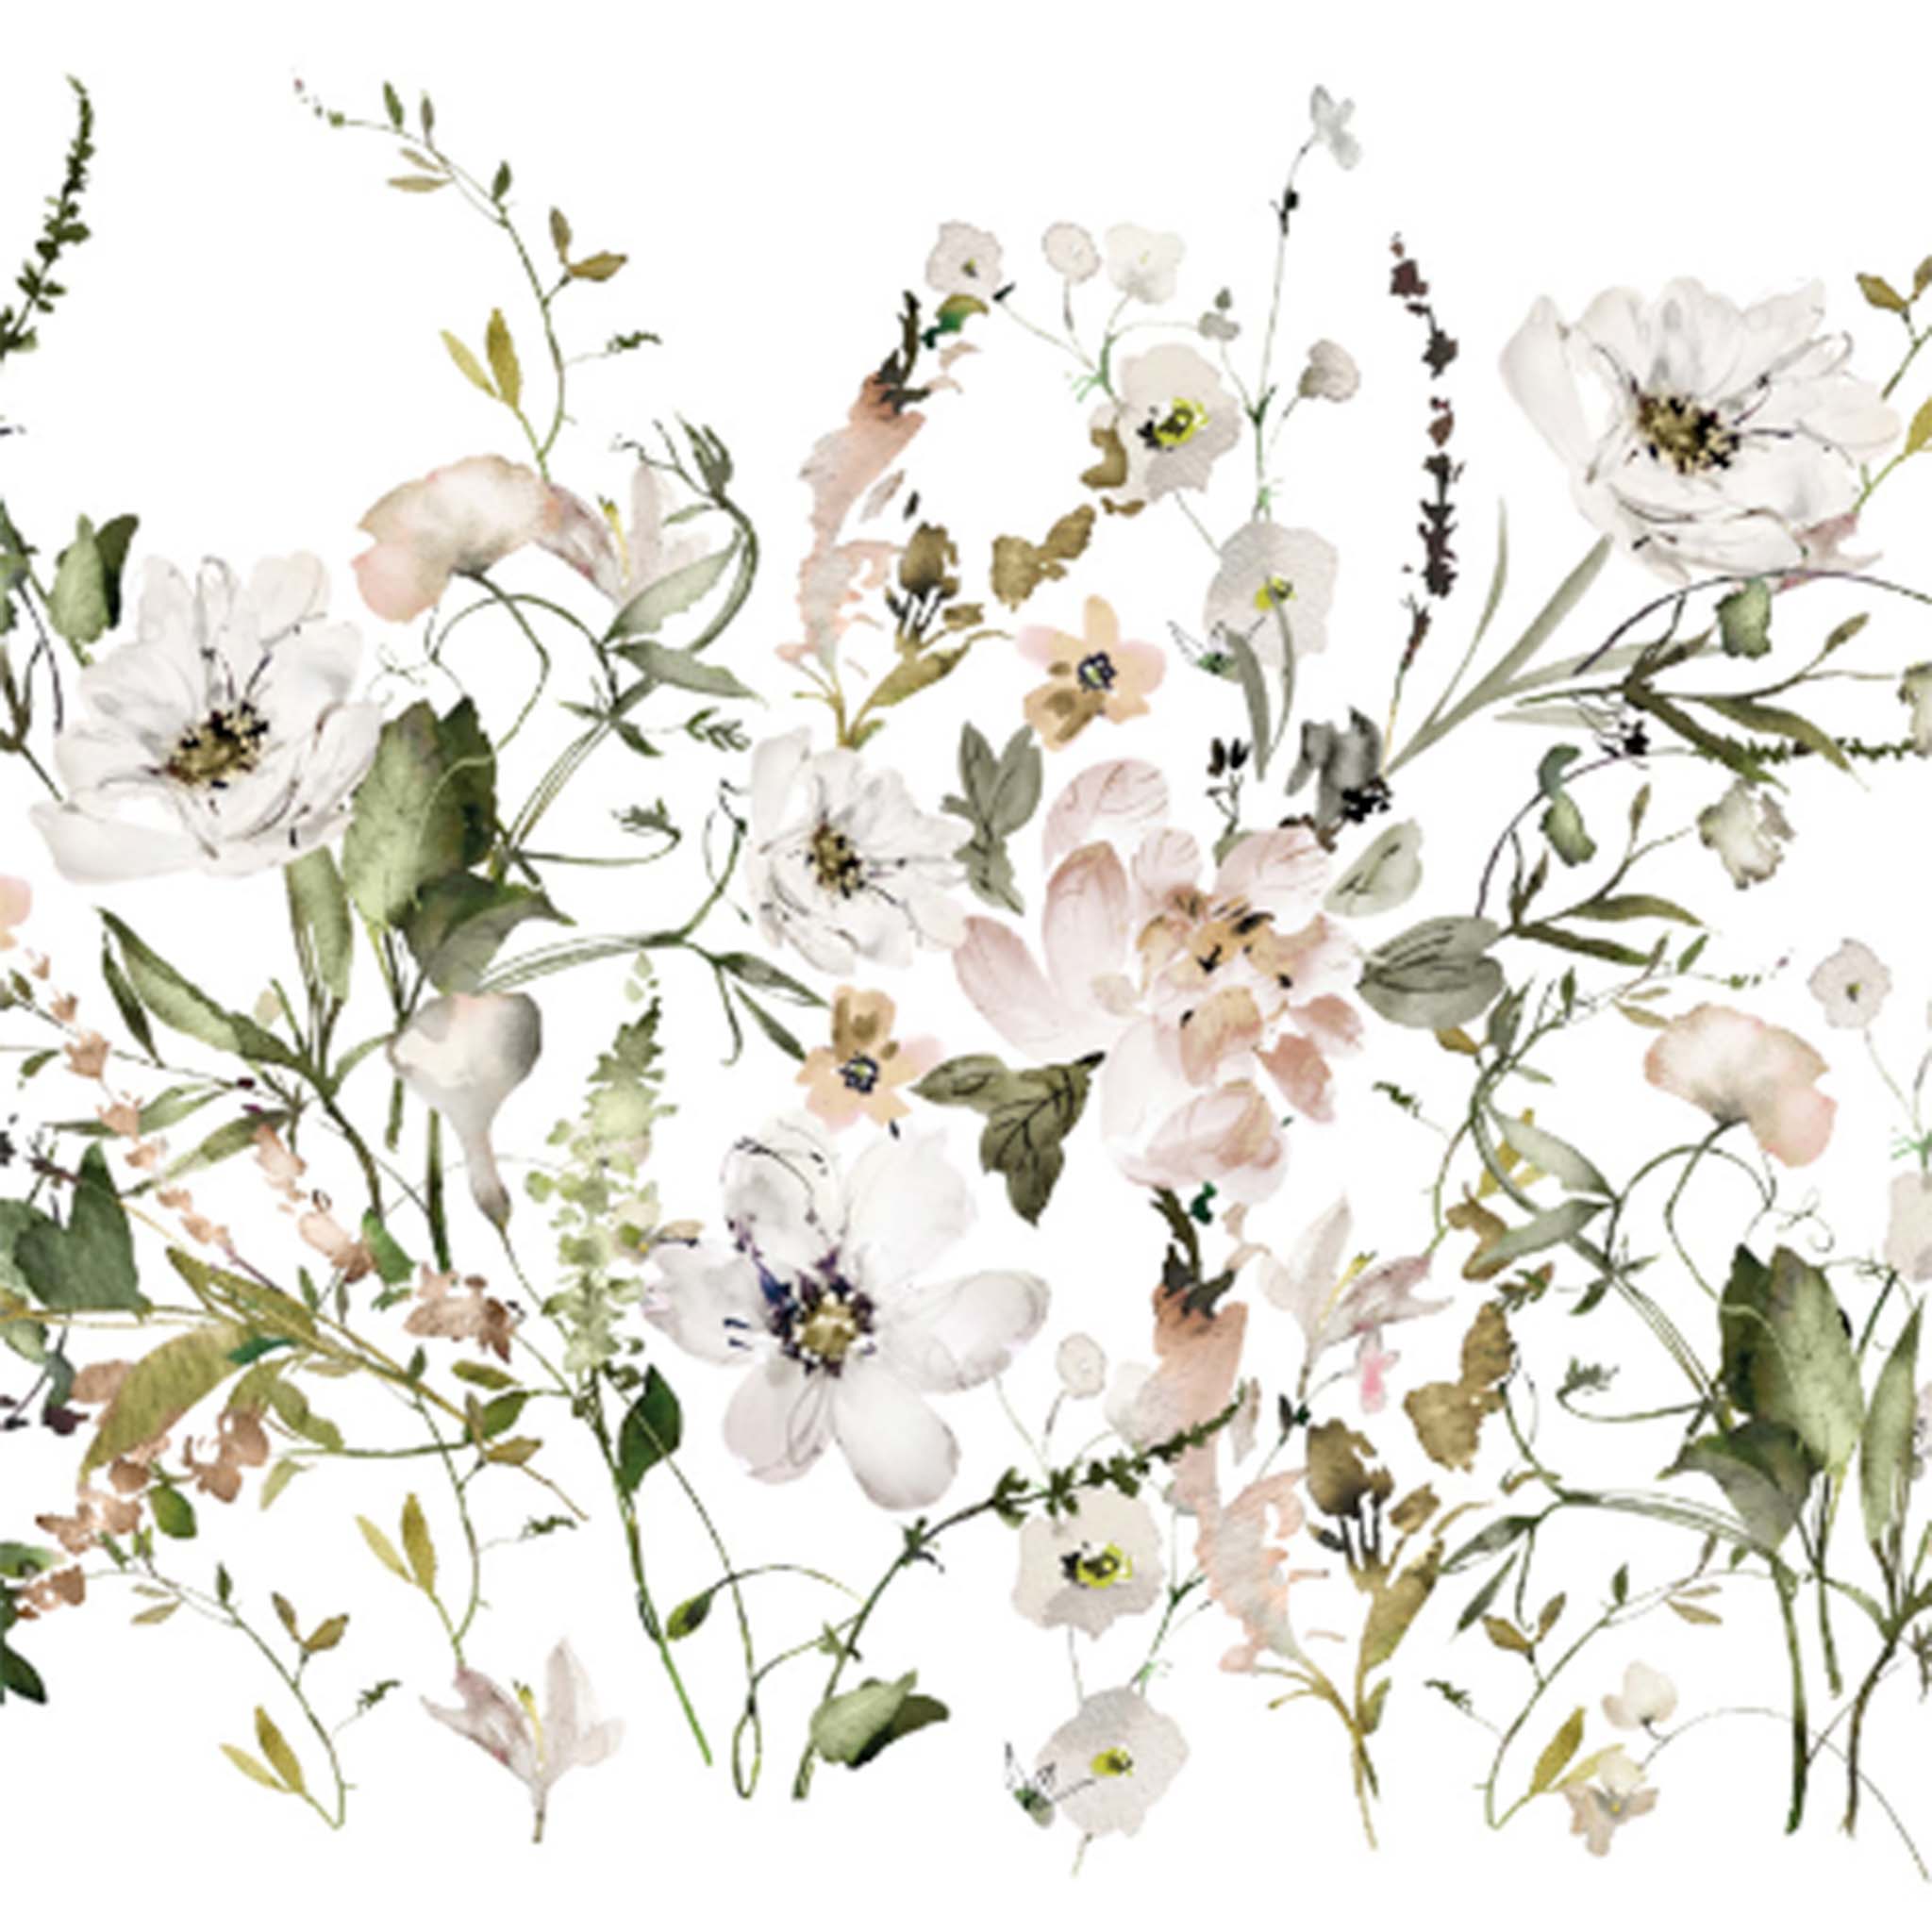 Close-up of a rub-on transfer design against a white background that features charming blush, cream, and white flowers surrounded by lush greenery.